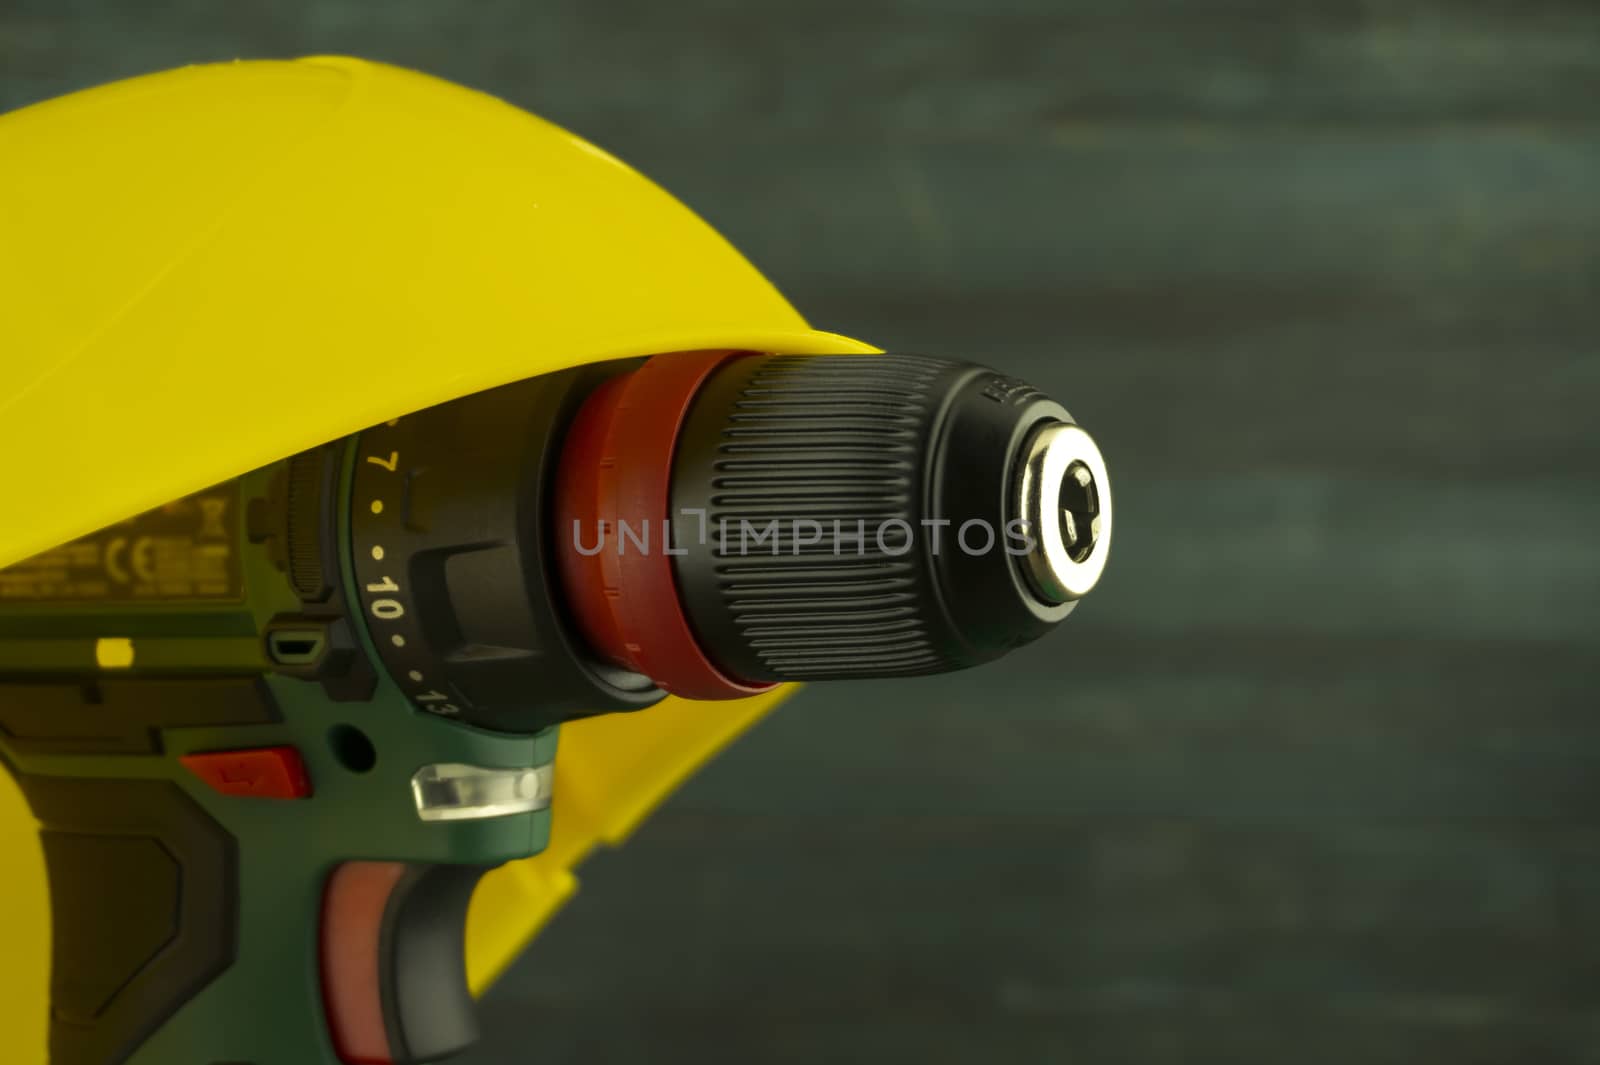 Cordless drill under yellow hardhat on a workbench, blurred in background. Construction tools and work equipment in close-up with copy space